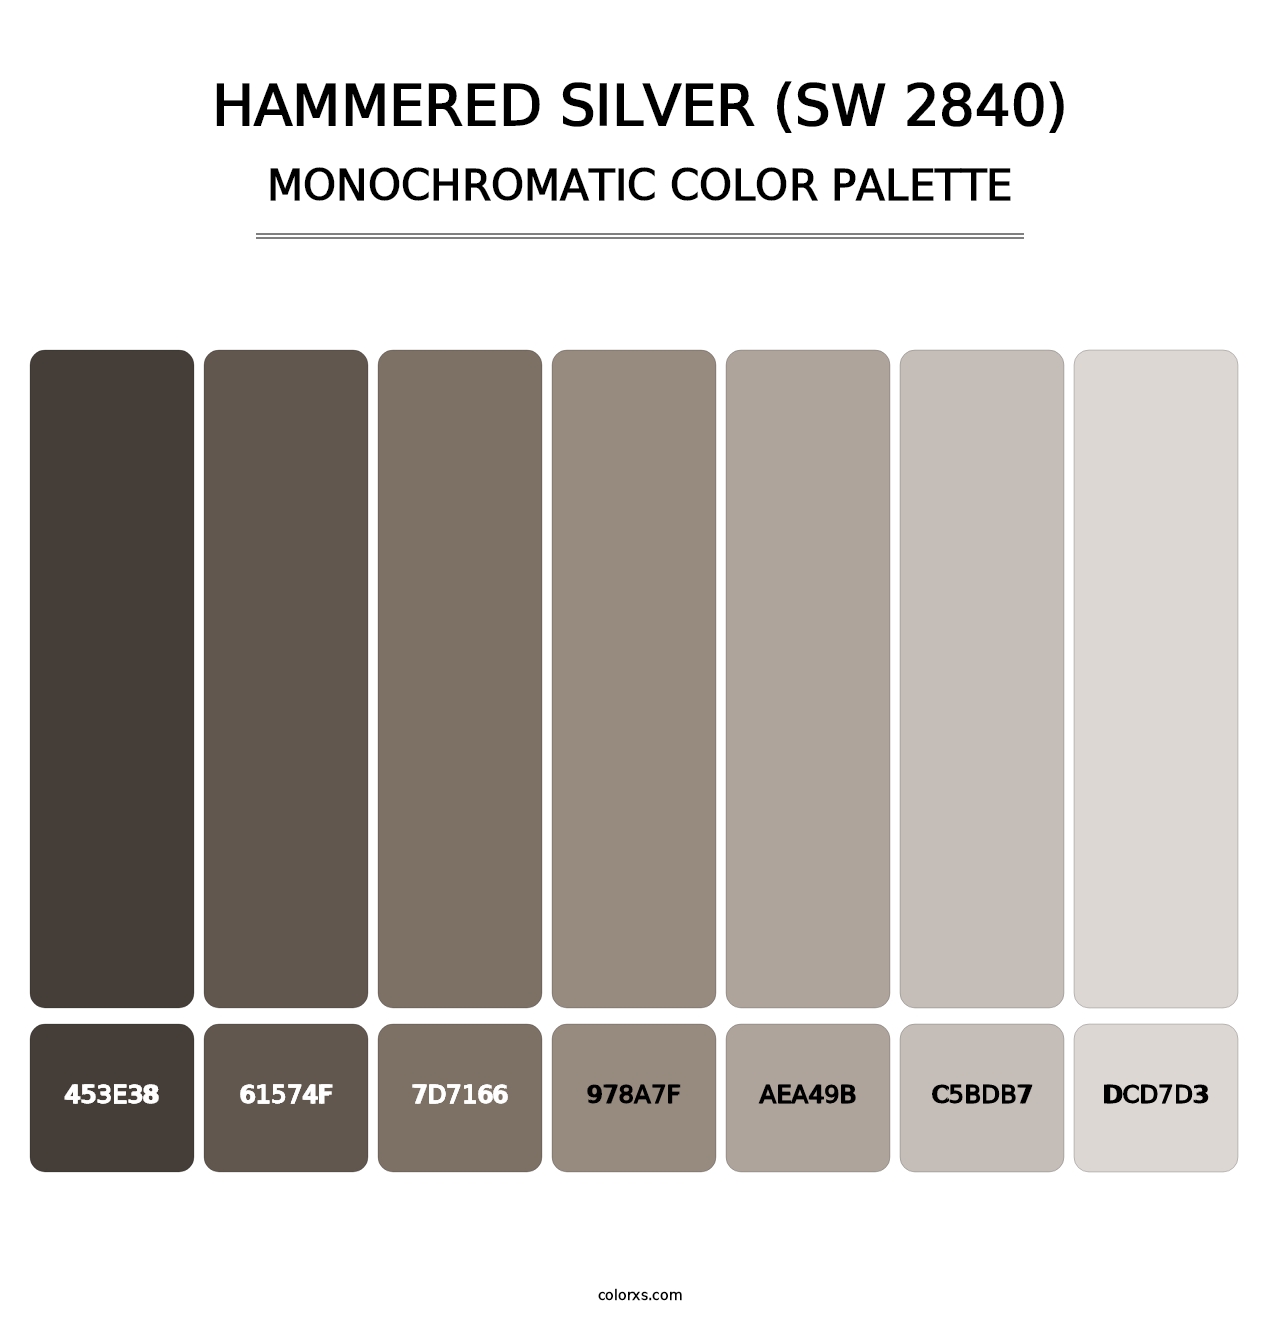 Hammered Silver (SW 2840) - Monochromatic Color Palette